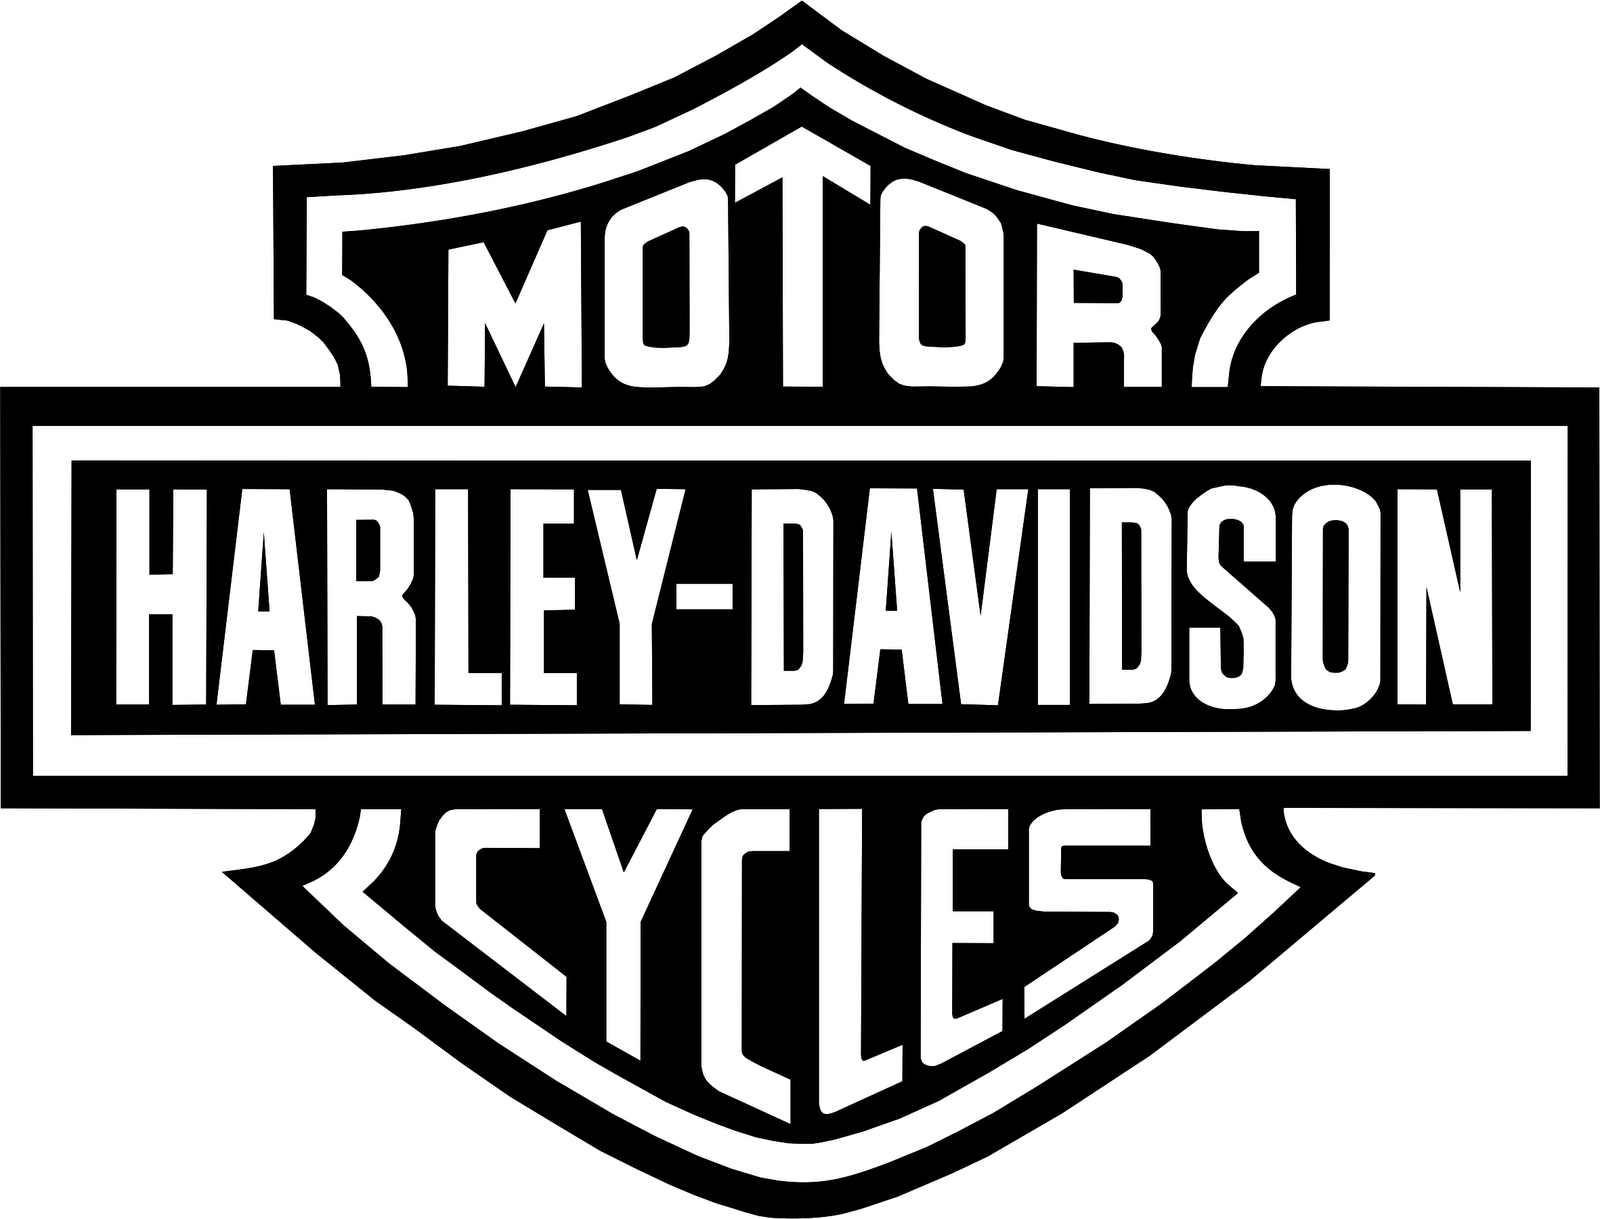 Harley-Davidson Logo - Harley davidson logo banner black and white - RR collections